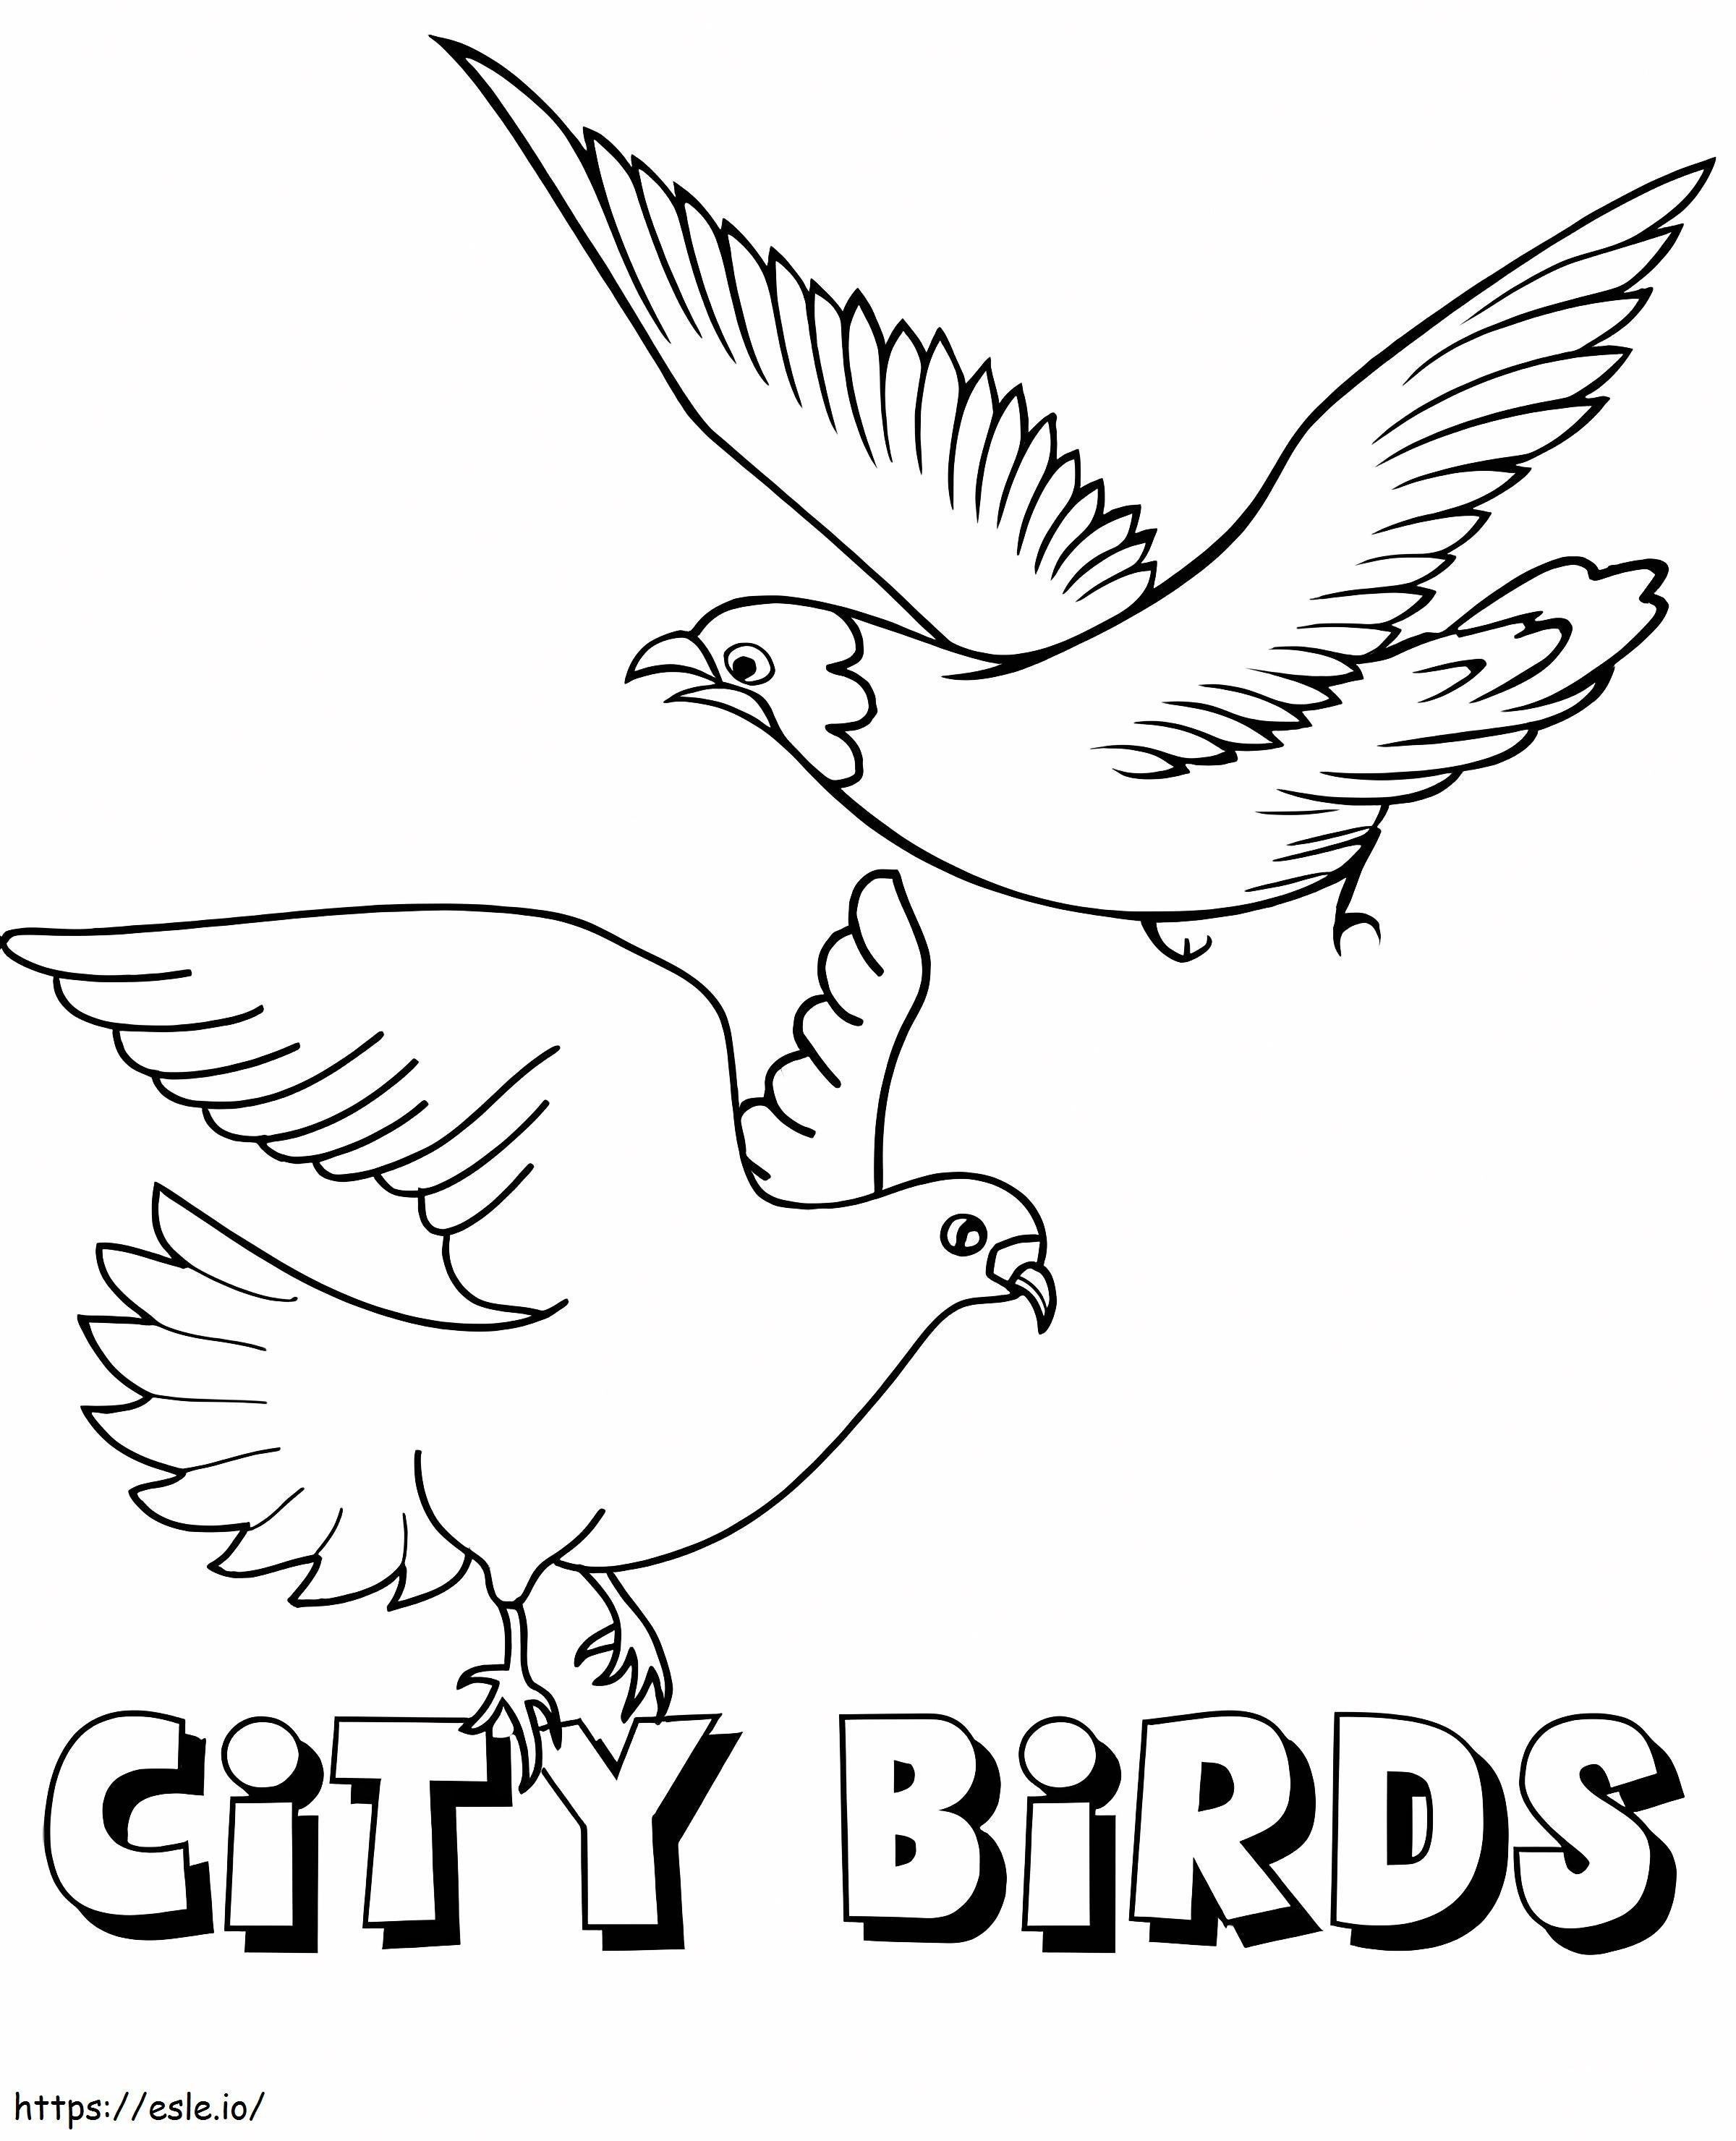 City Of Pigeons coloring page